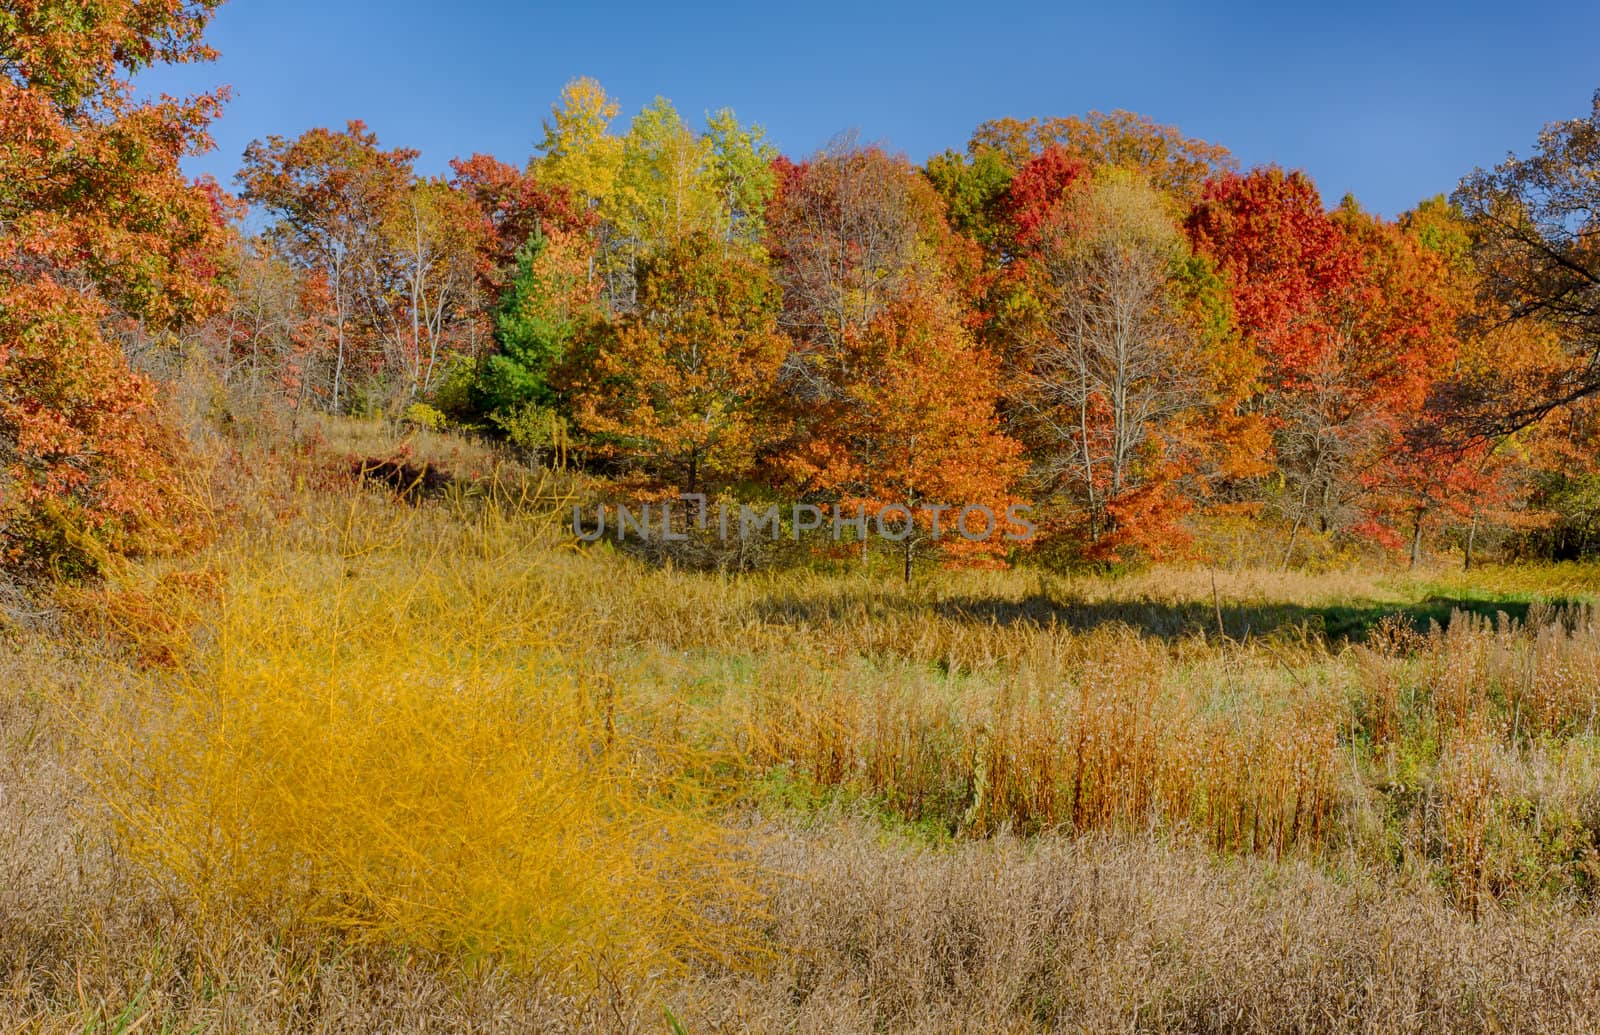 Autumn in Fall Color at the Marsh